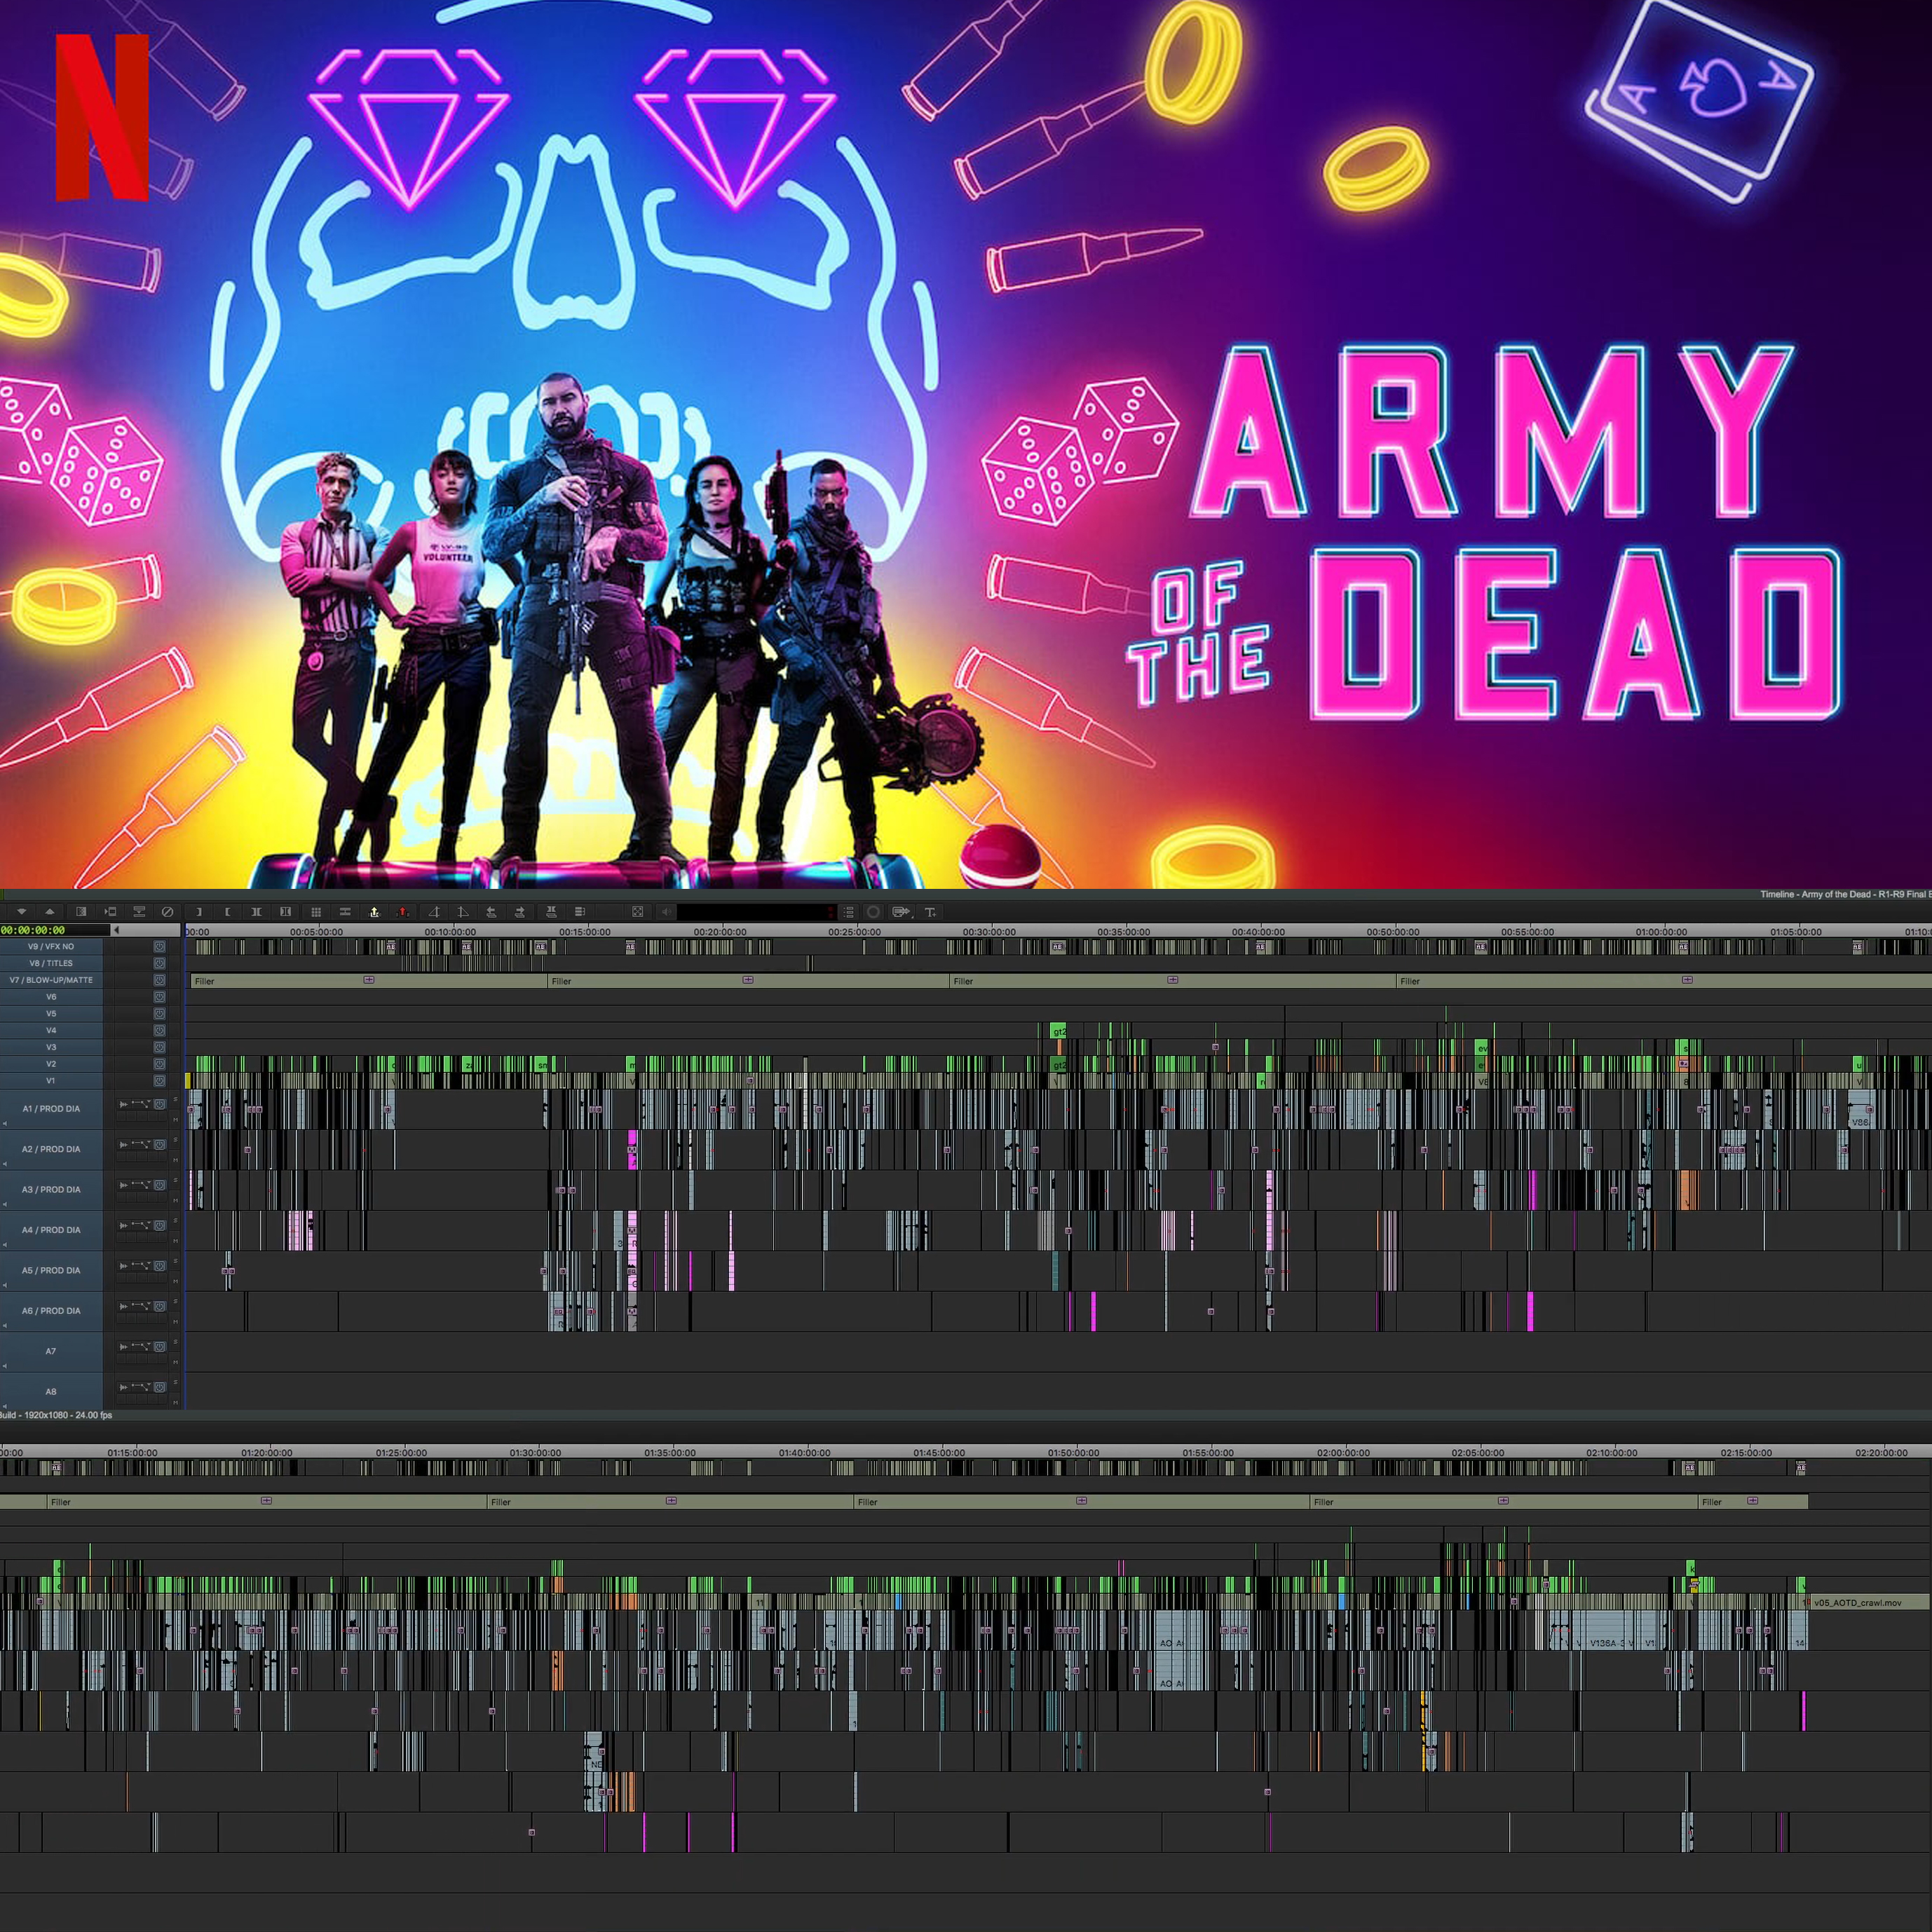 Avid Editor Dody Dorn Ace Shares Her Media Composer Timeline For Army Of The Dead T Co Wtslyp6t4j Timelinetuesday Armyofthedead Editing Filmmaking Zacksnyder Movies Avid T Co Skzmaekmct Twitter